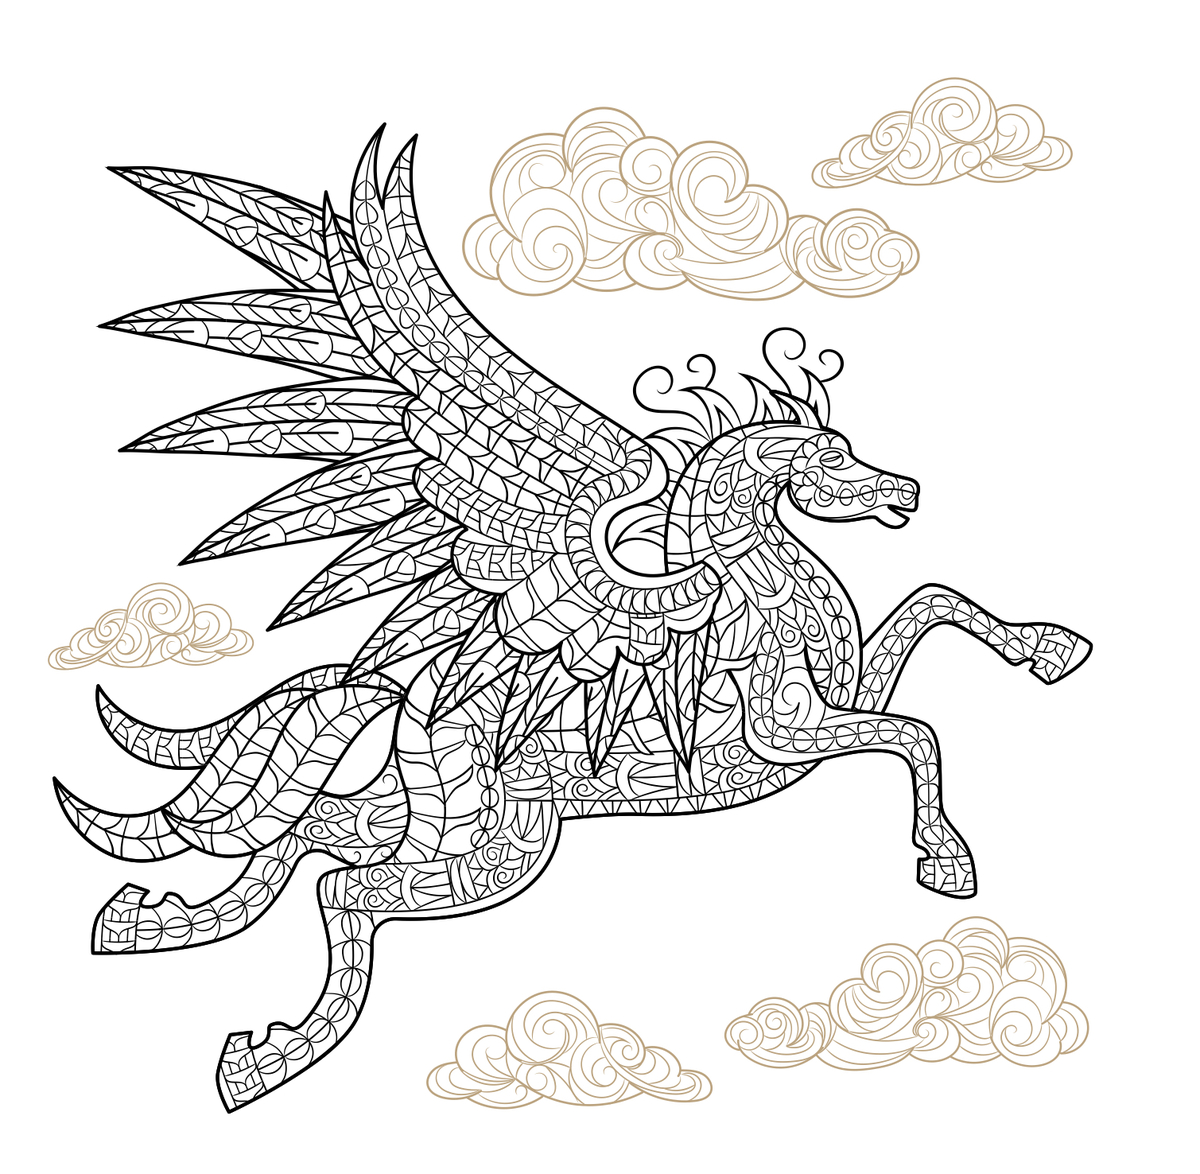 Pegasus winged horse adult coloring page